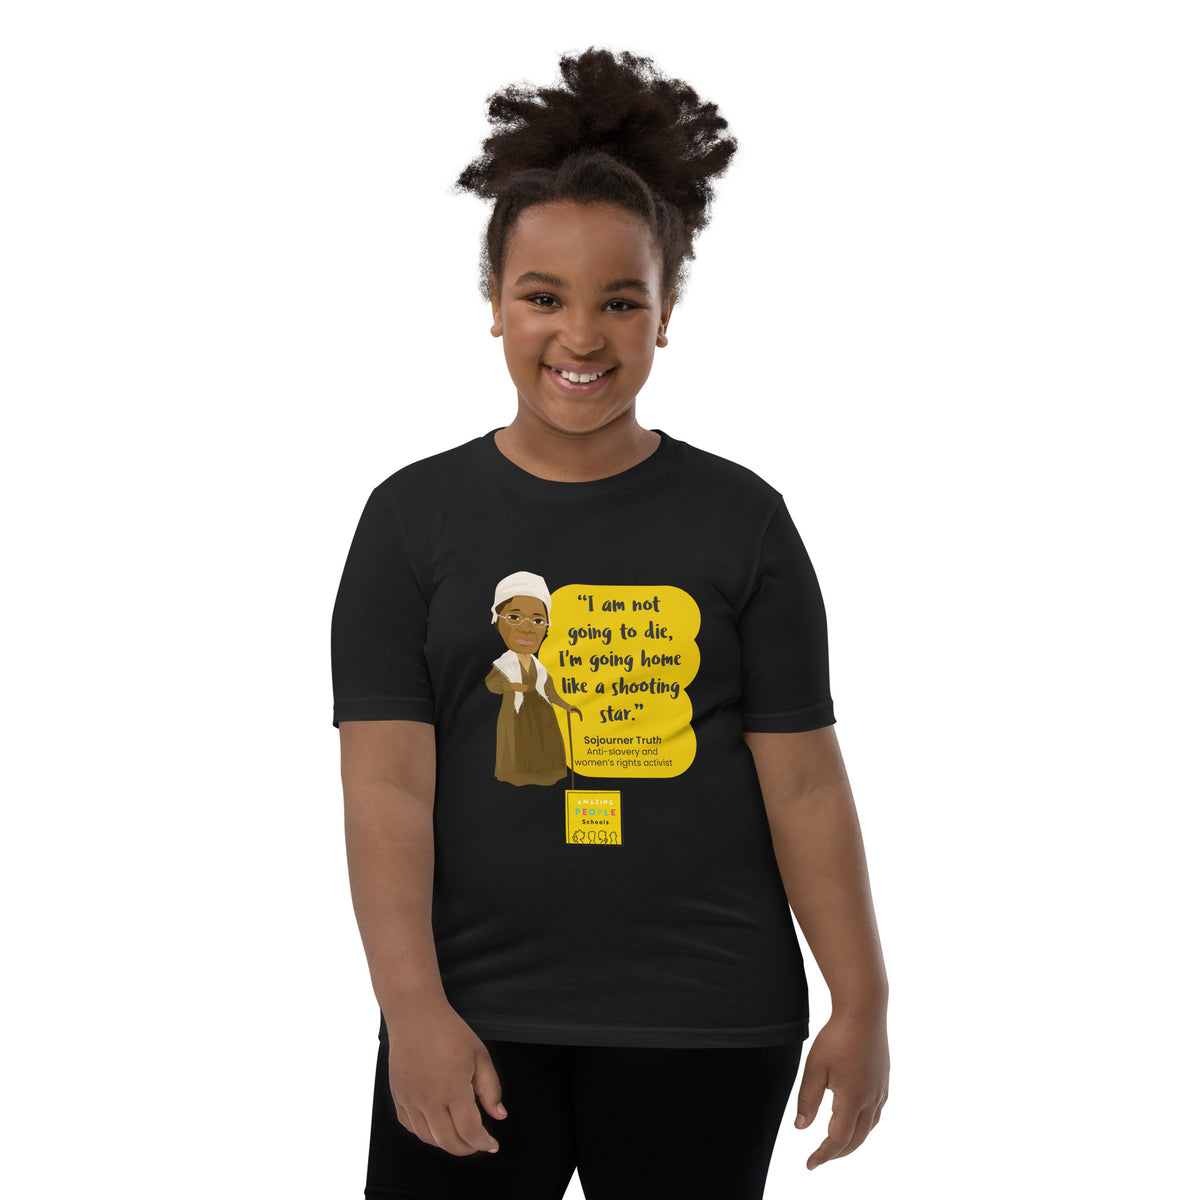 Sojourner Truth Youth T-shirt